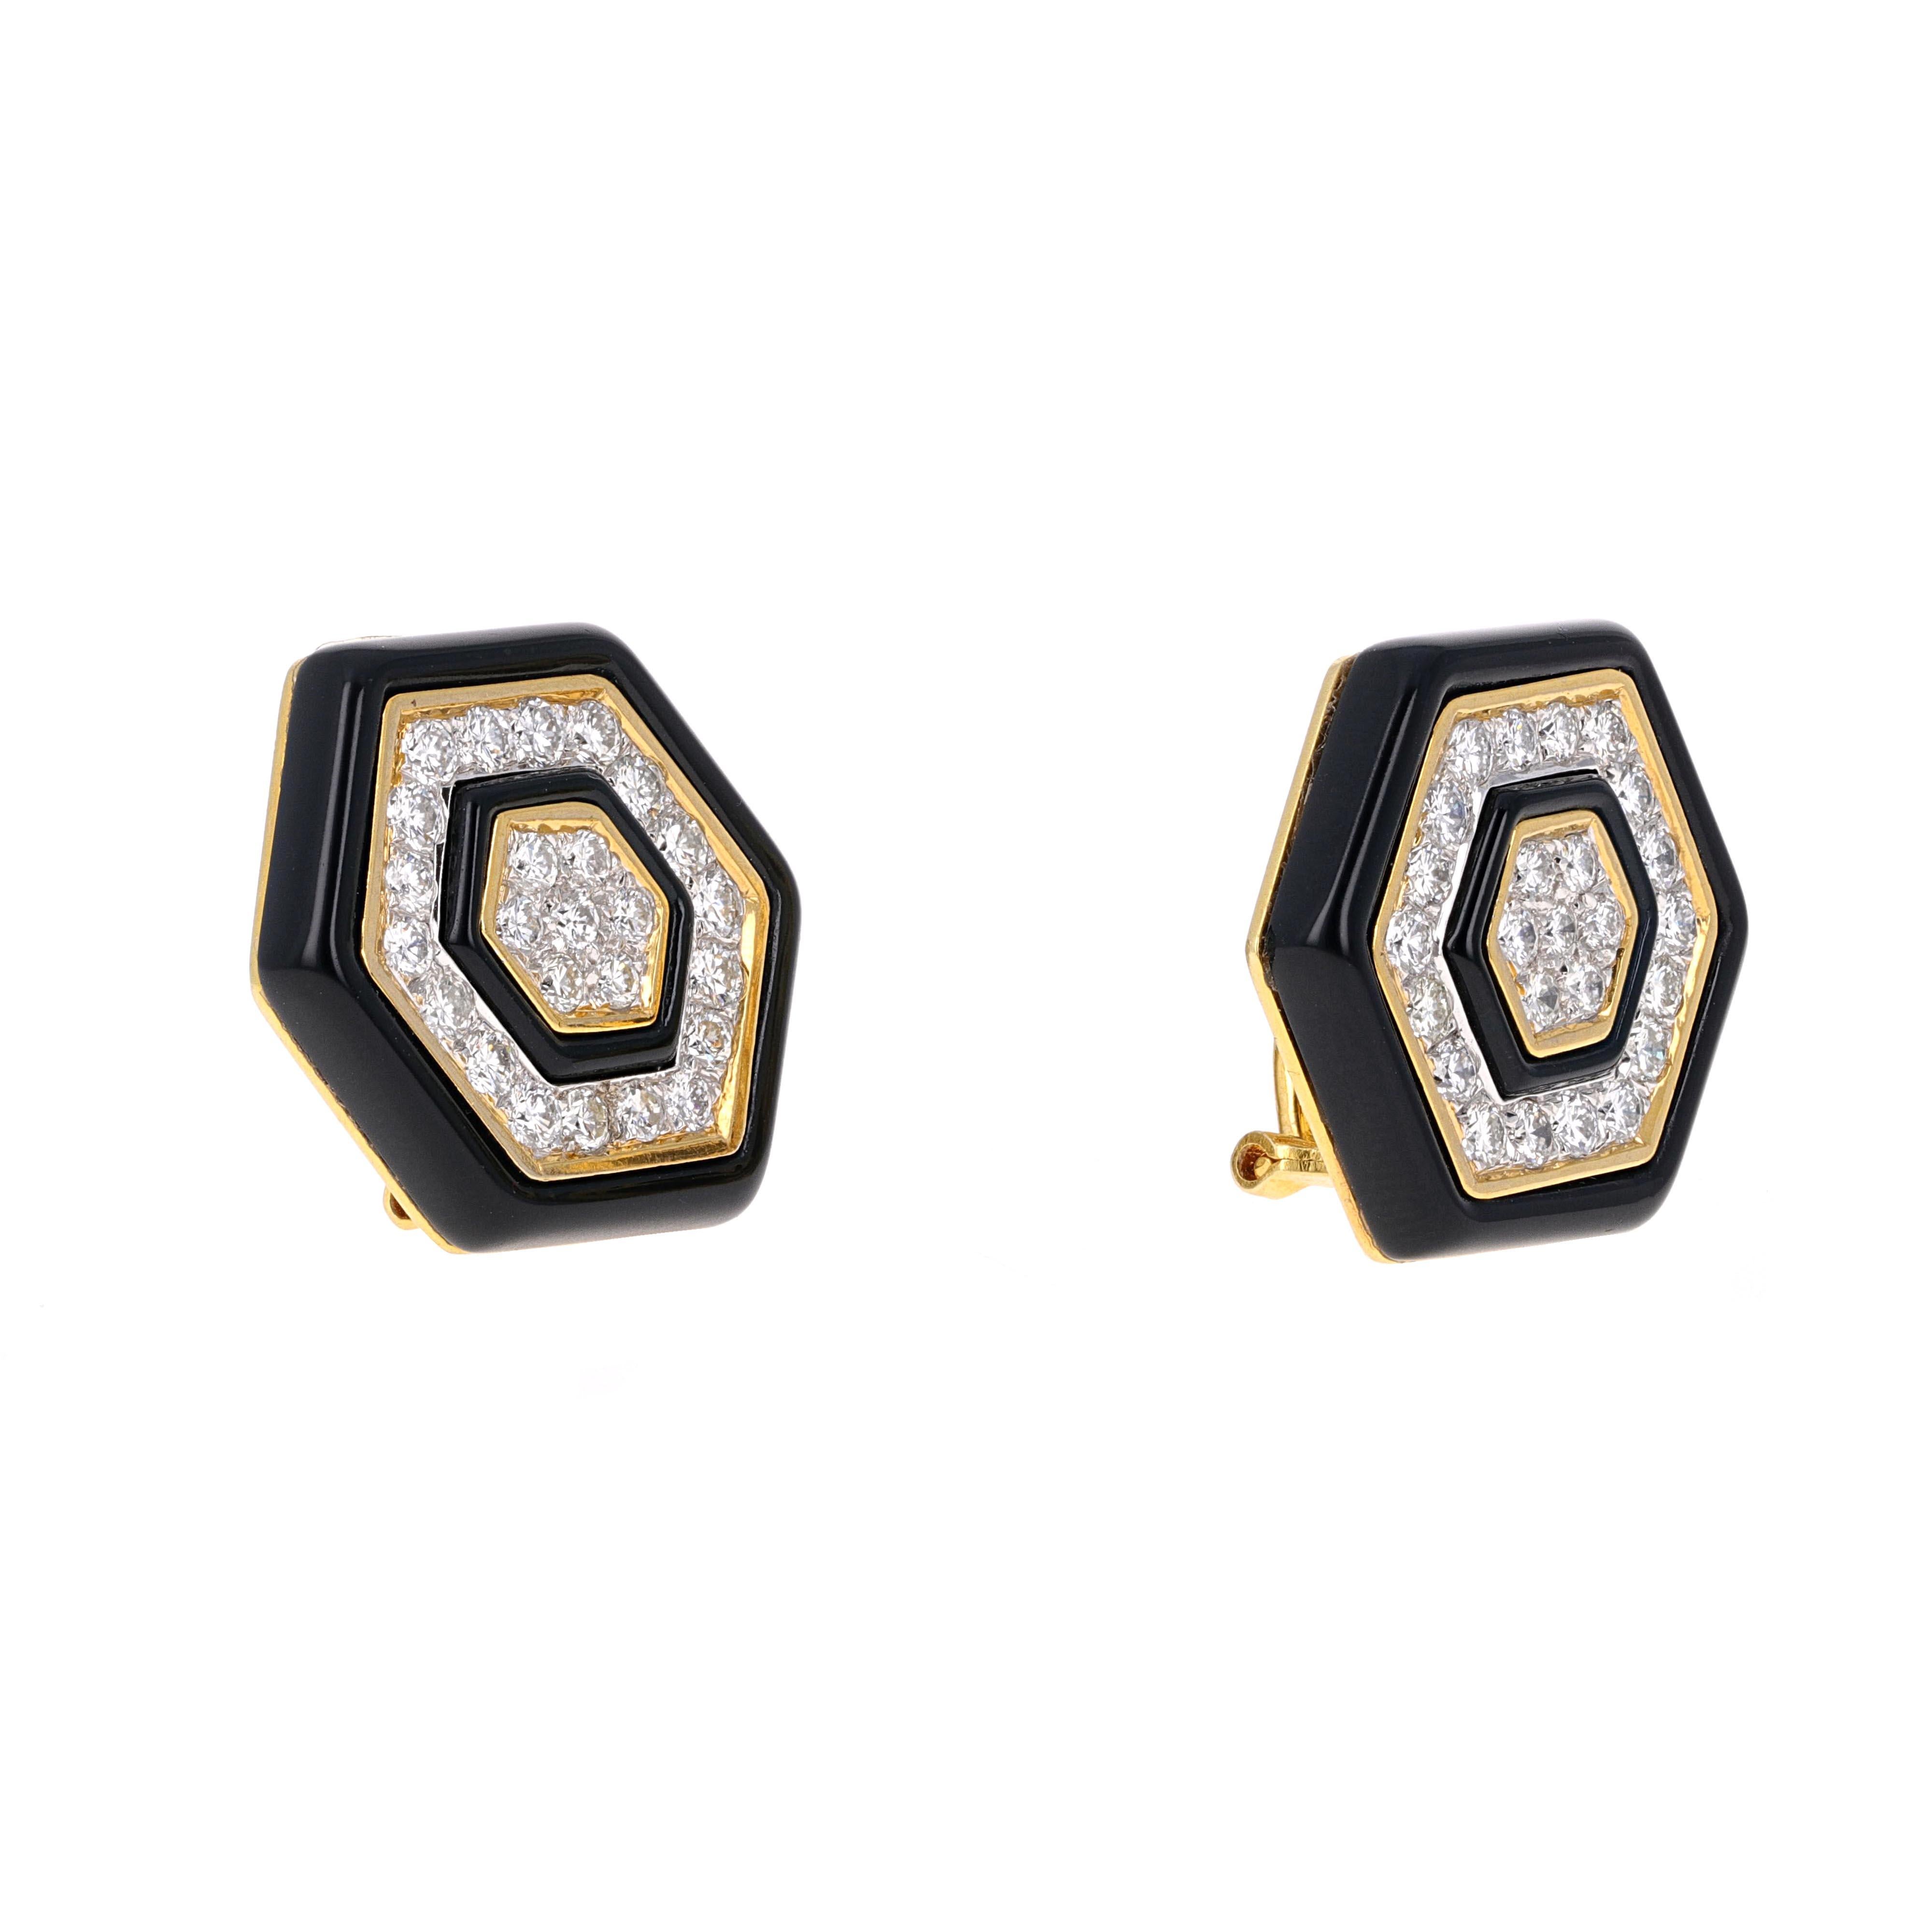 18 karat yellow gold onyx and diamond earrings. They are Retro Style, clip-on and have a lever-back. They are in excellent condition.
The earrings have 50 diamonds weighing an estimated 1.35 carats total weight.